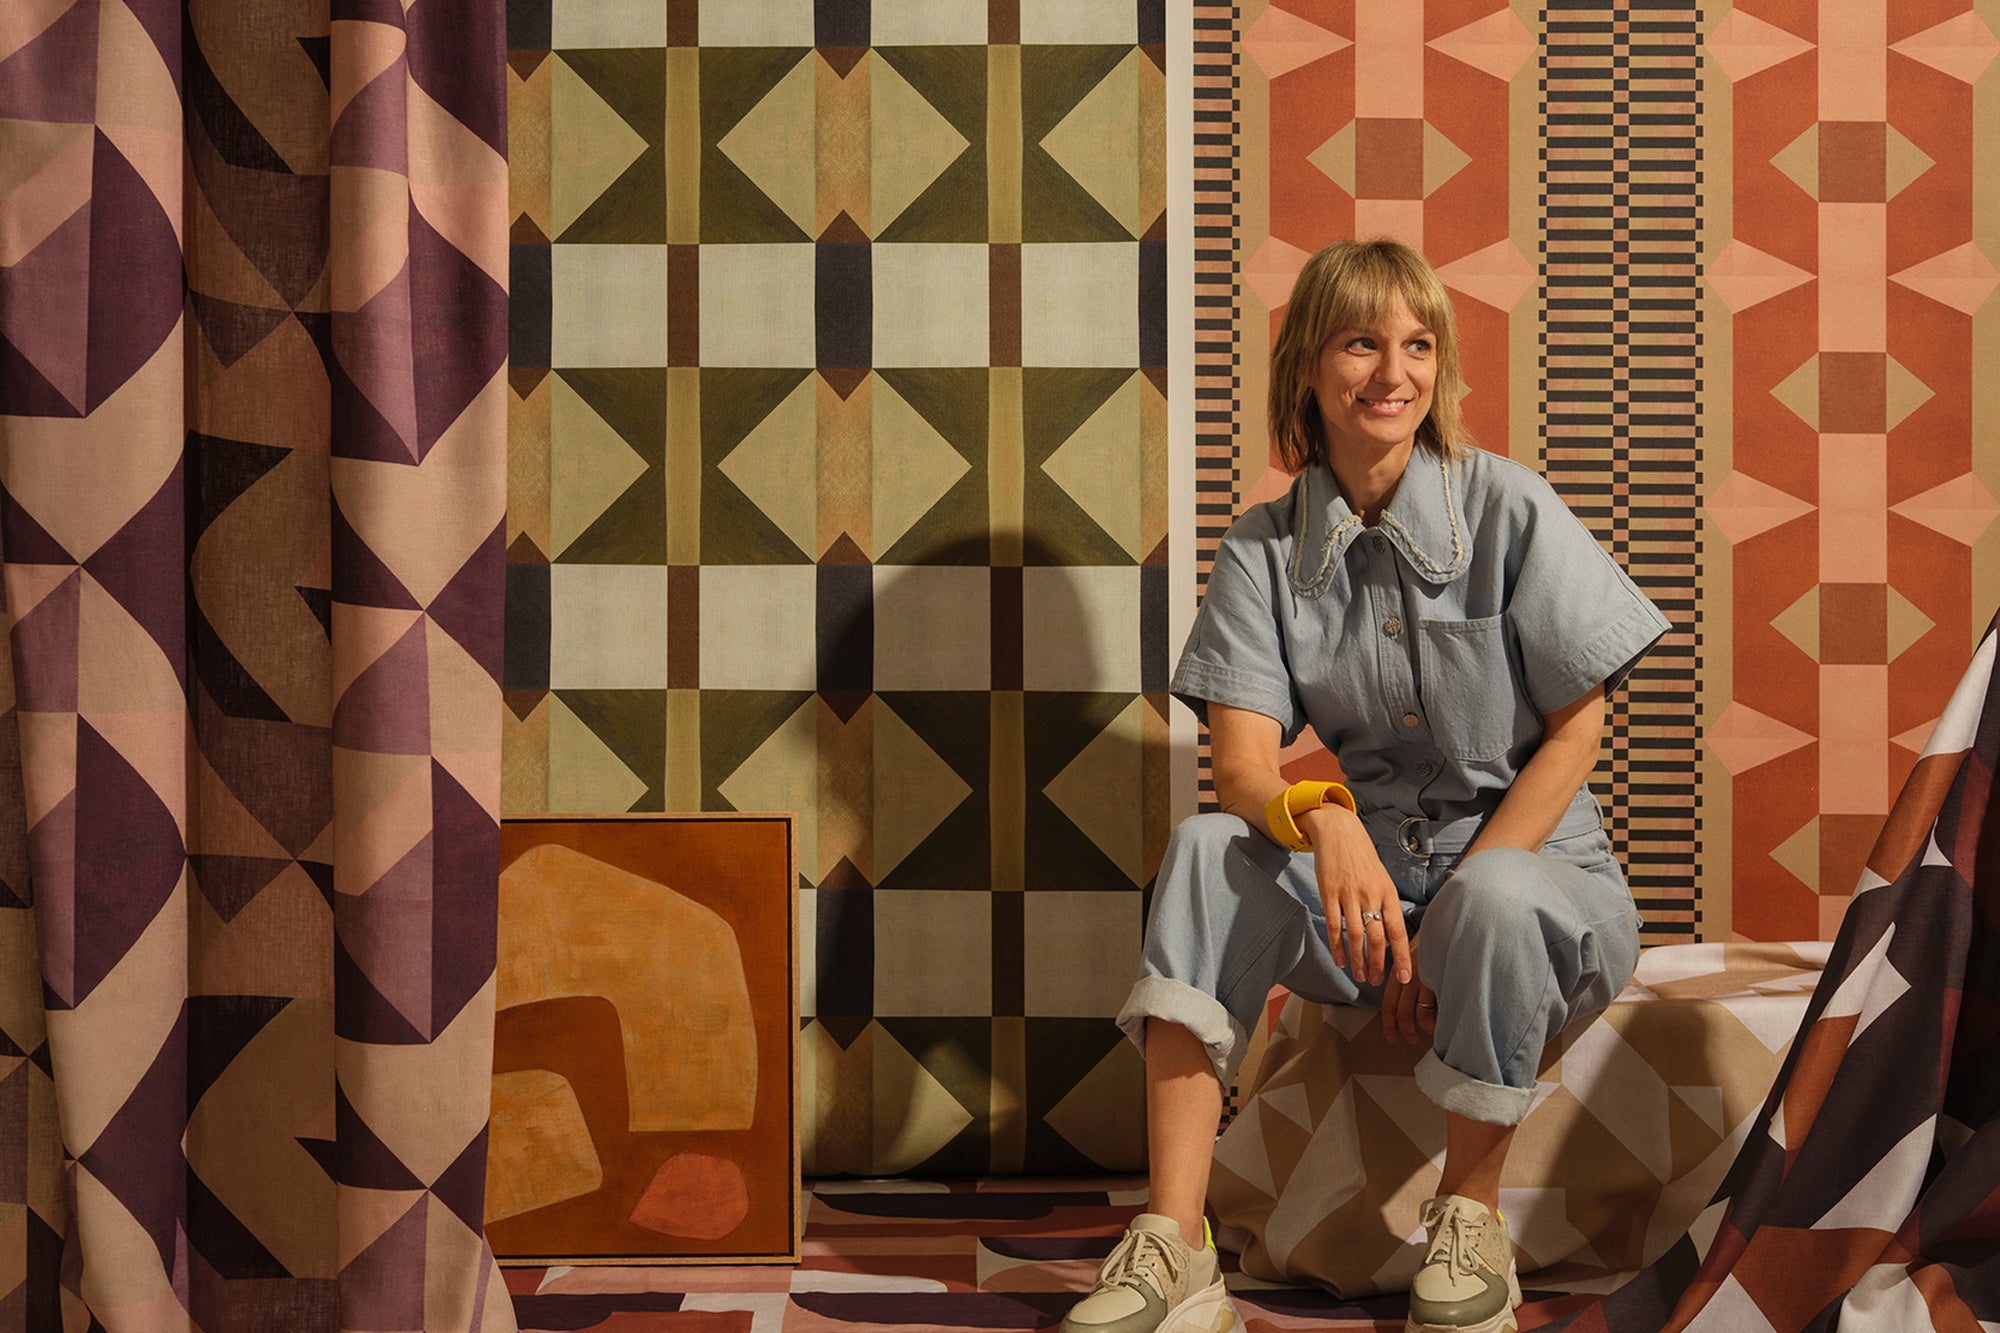 Portait of a blonde woman in a denim jumpsuit, against a colorful geometric background